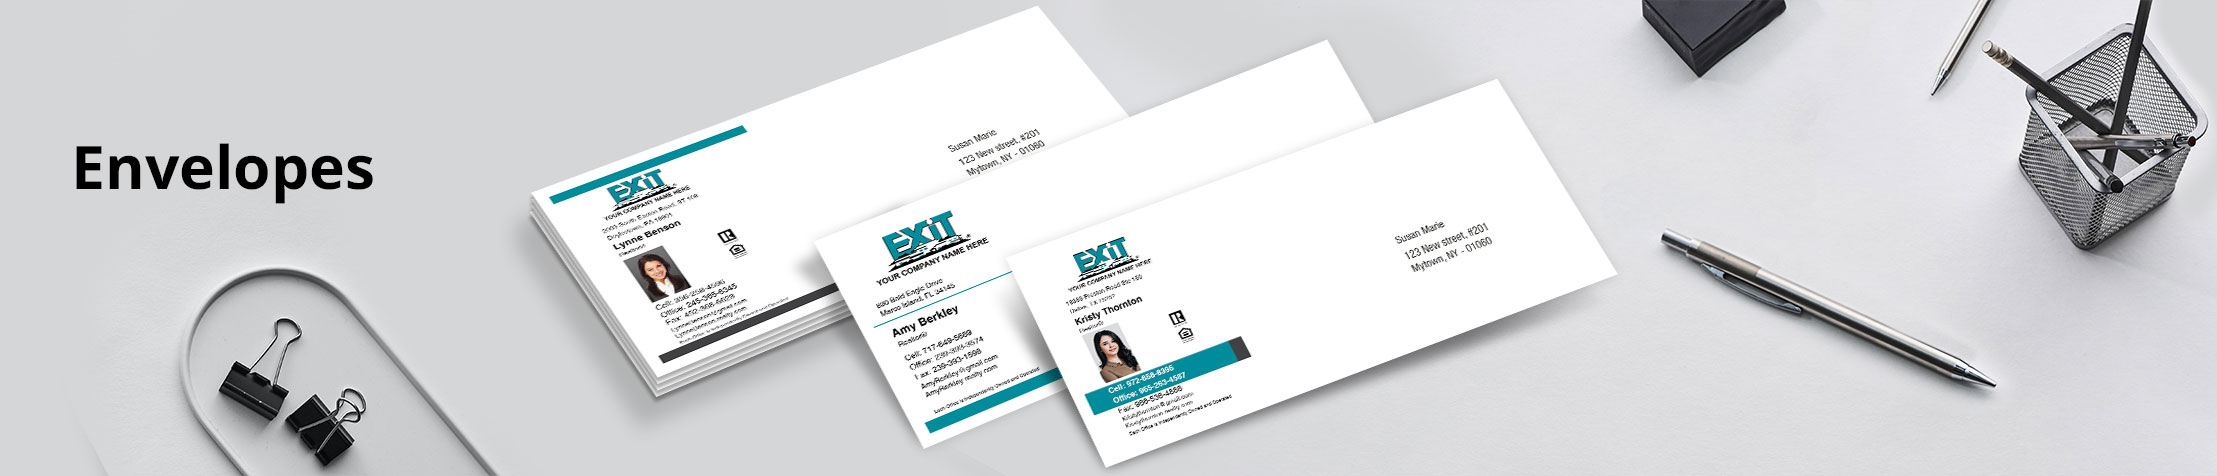 Exit Realty #10 Envelopes - Exit Realty Approved Vendor - Custom Stationery Templates for Exit Realty Offices and Real Estate Agents | BestPrintBuy.com